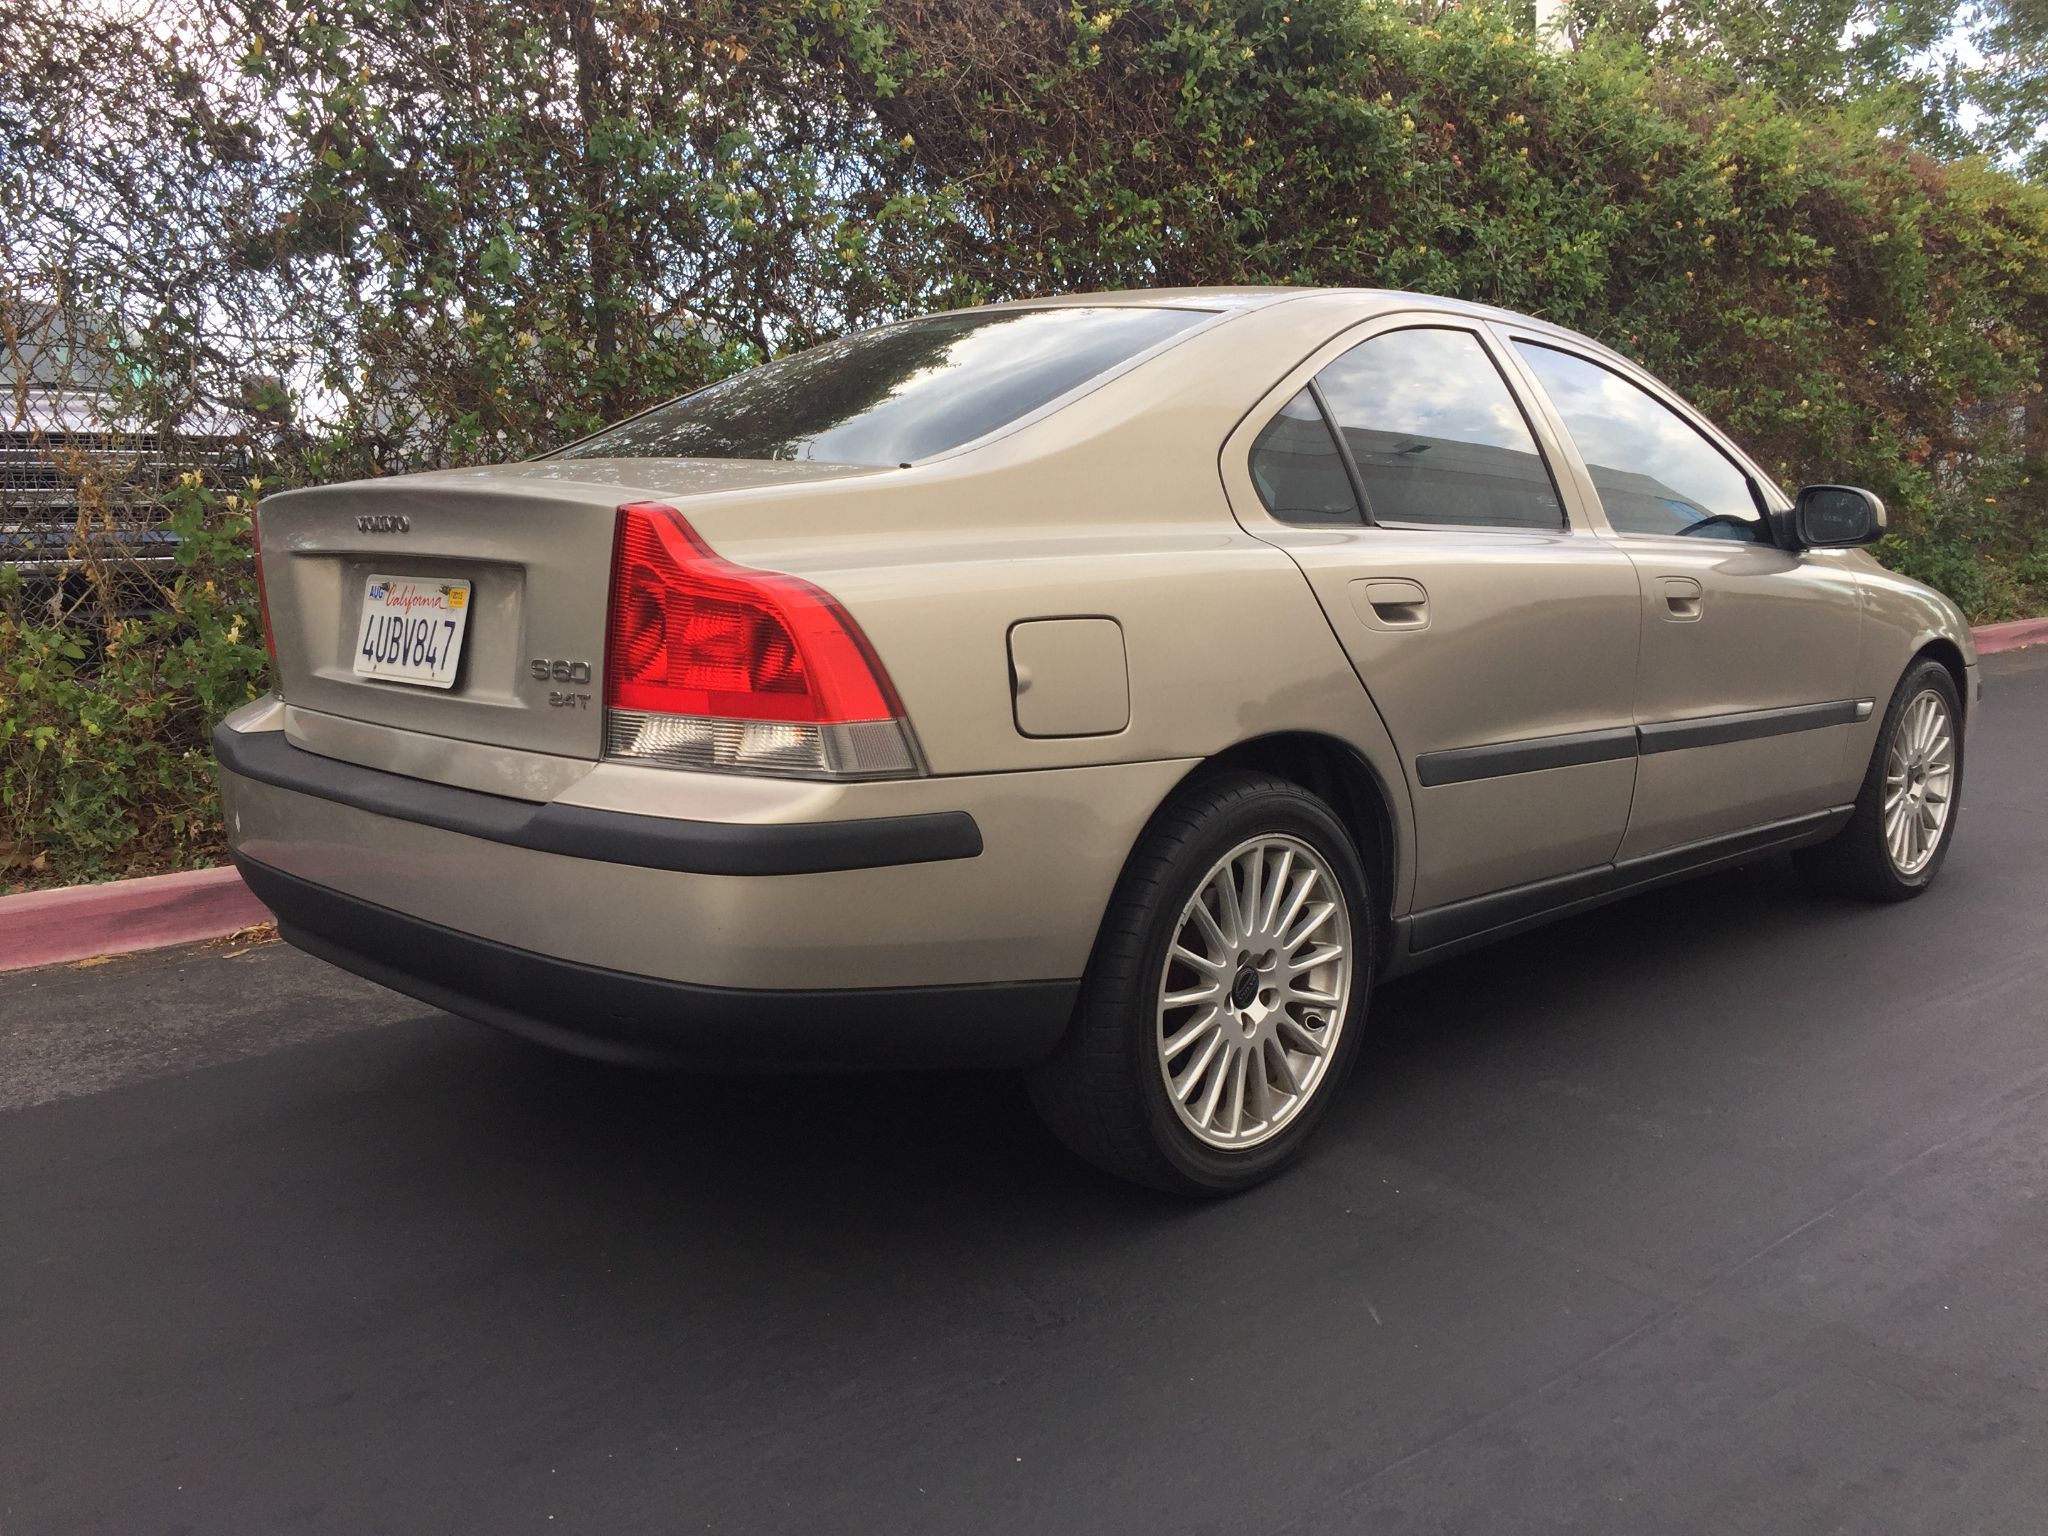 Used 2001 Volvo S60 at City Cars Warehouse INC